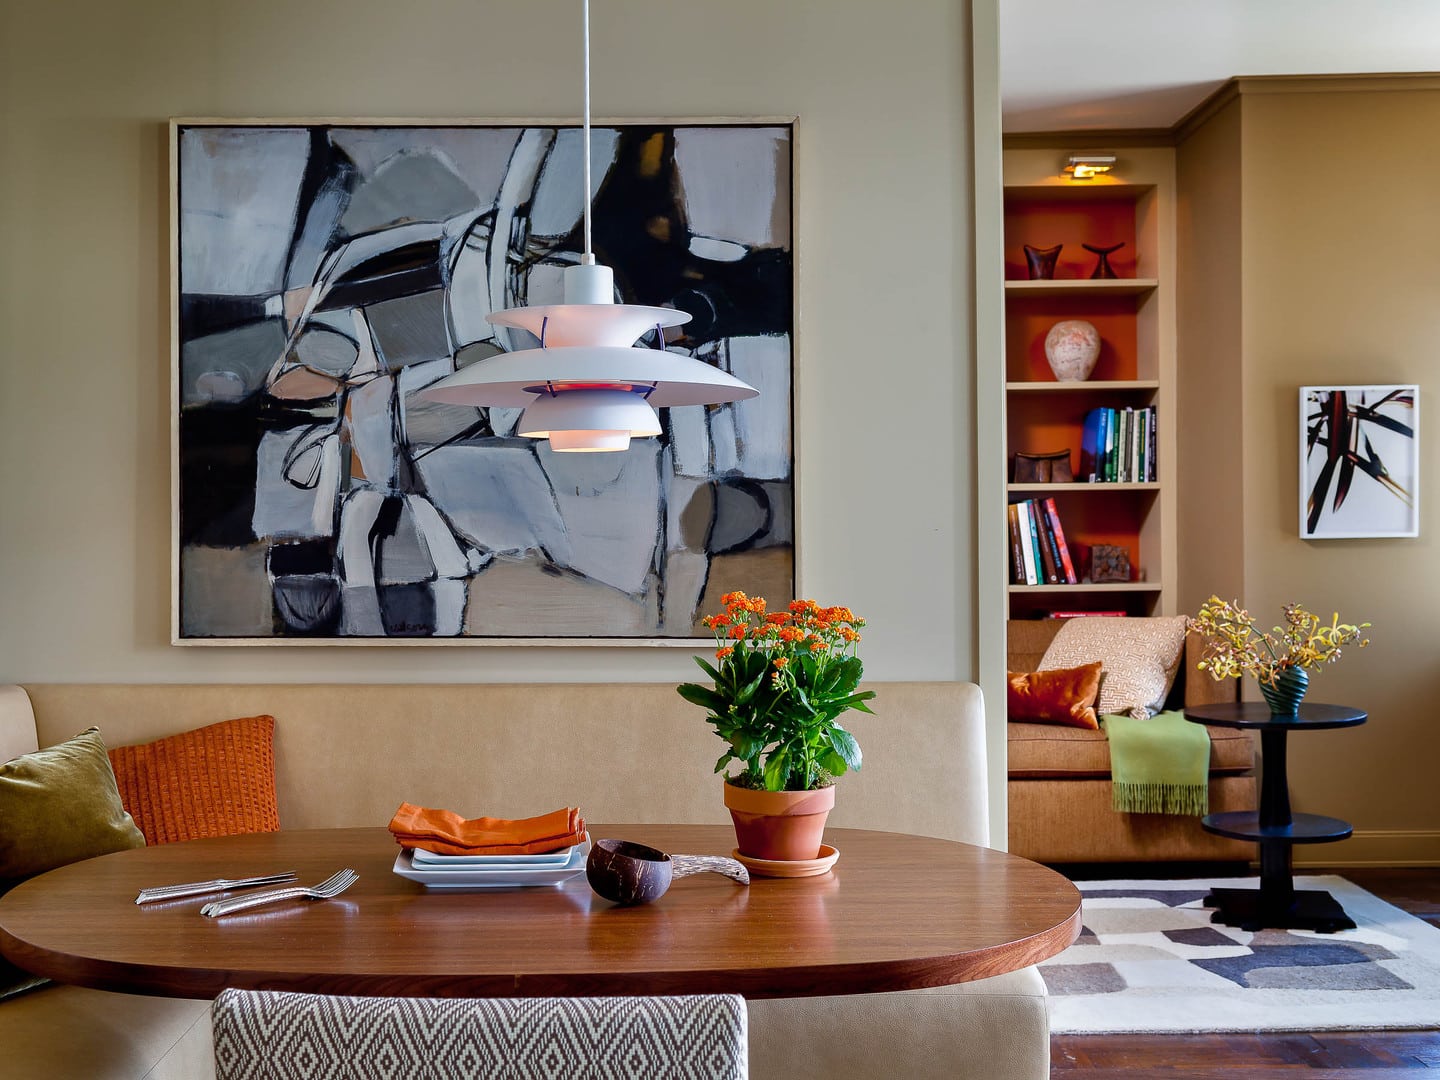 Pied-à-Terre – Upper East Side, NYC